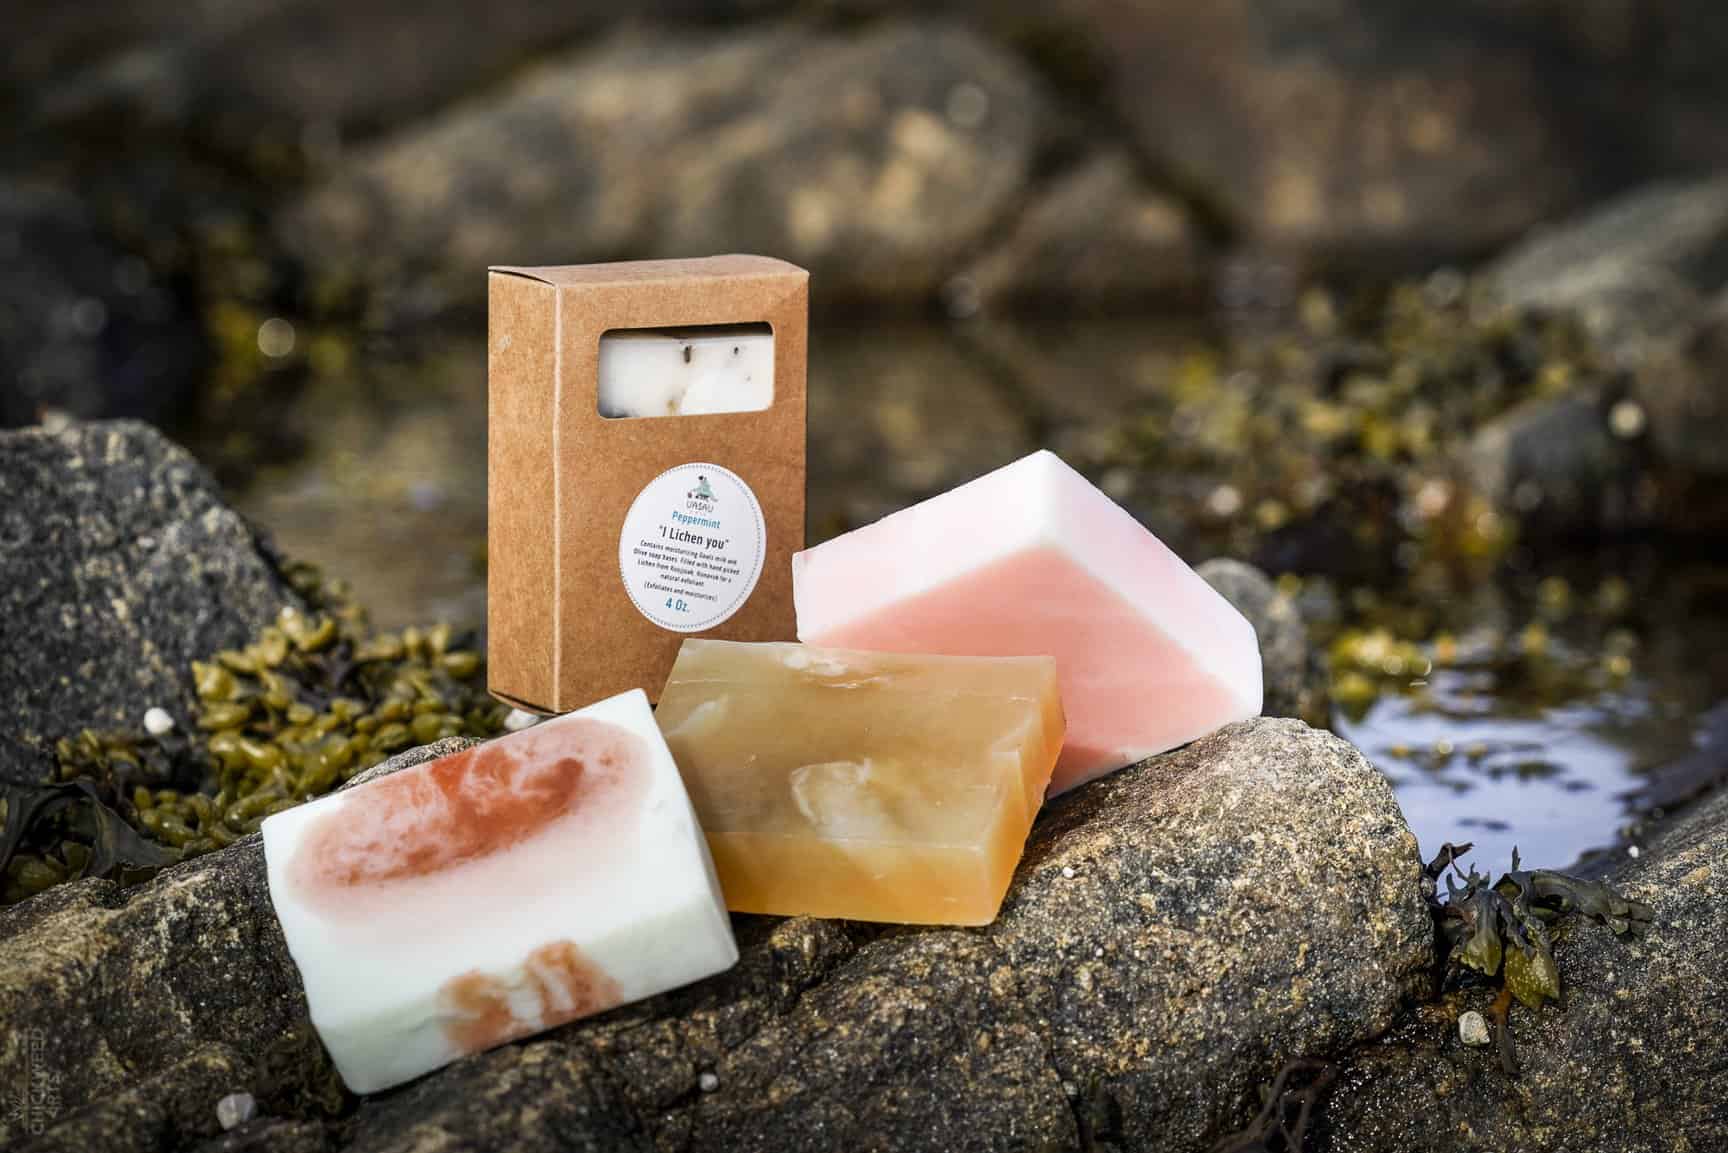 uasau brand soap bars displayed in a natural outdoor setting